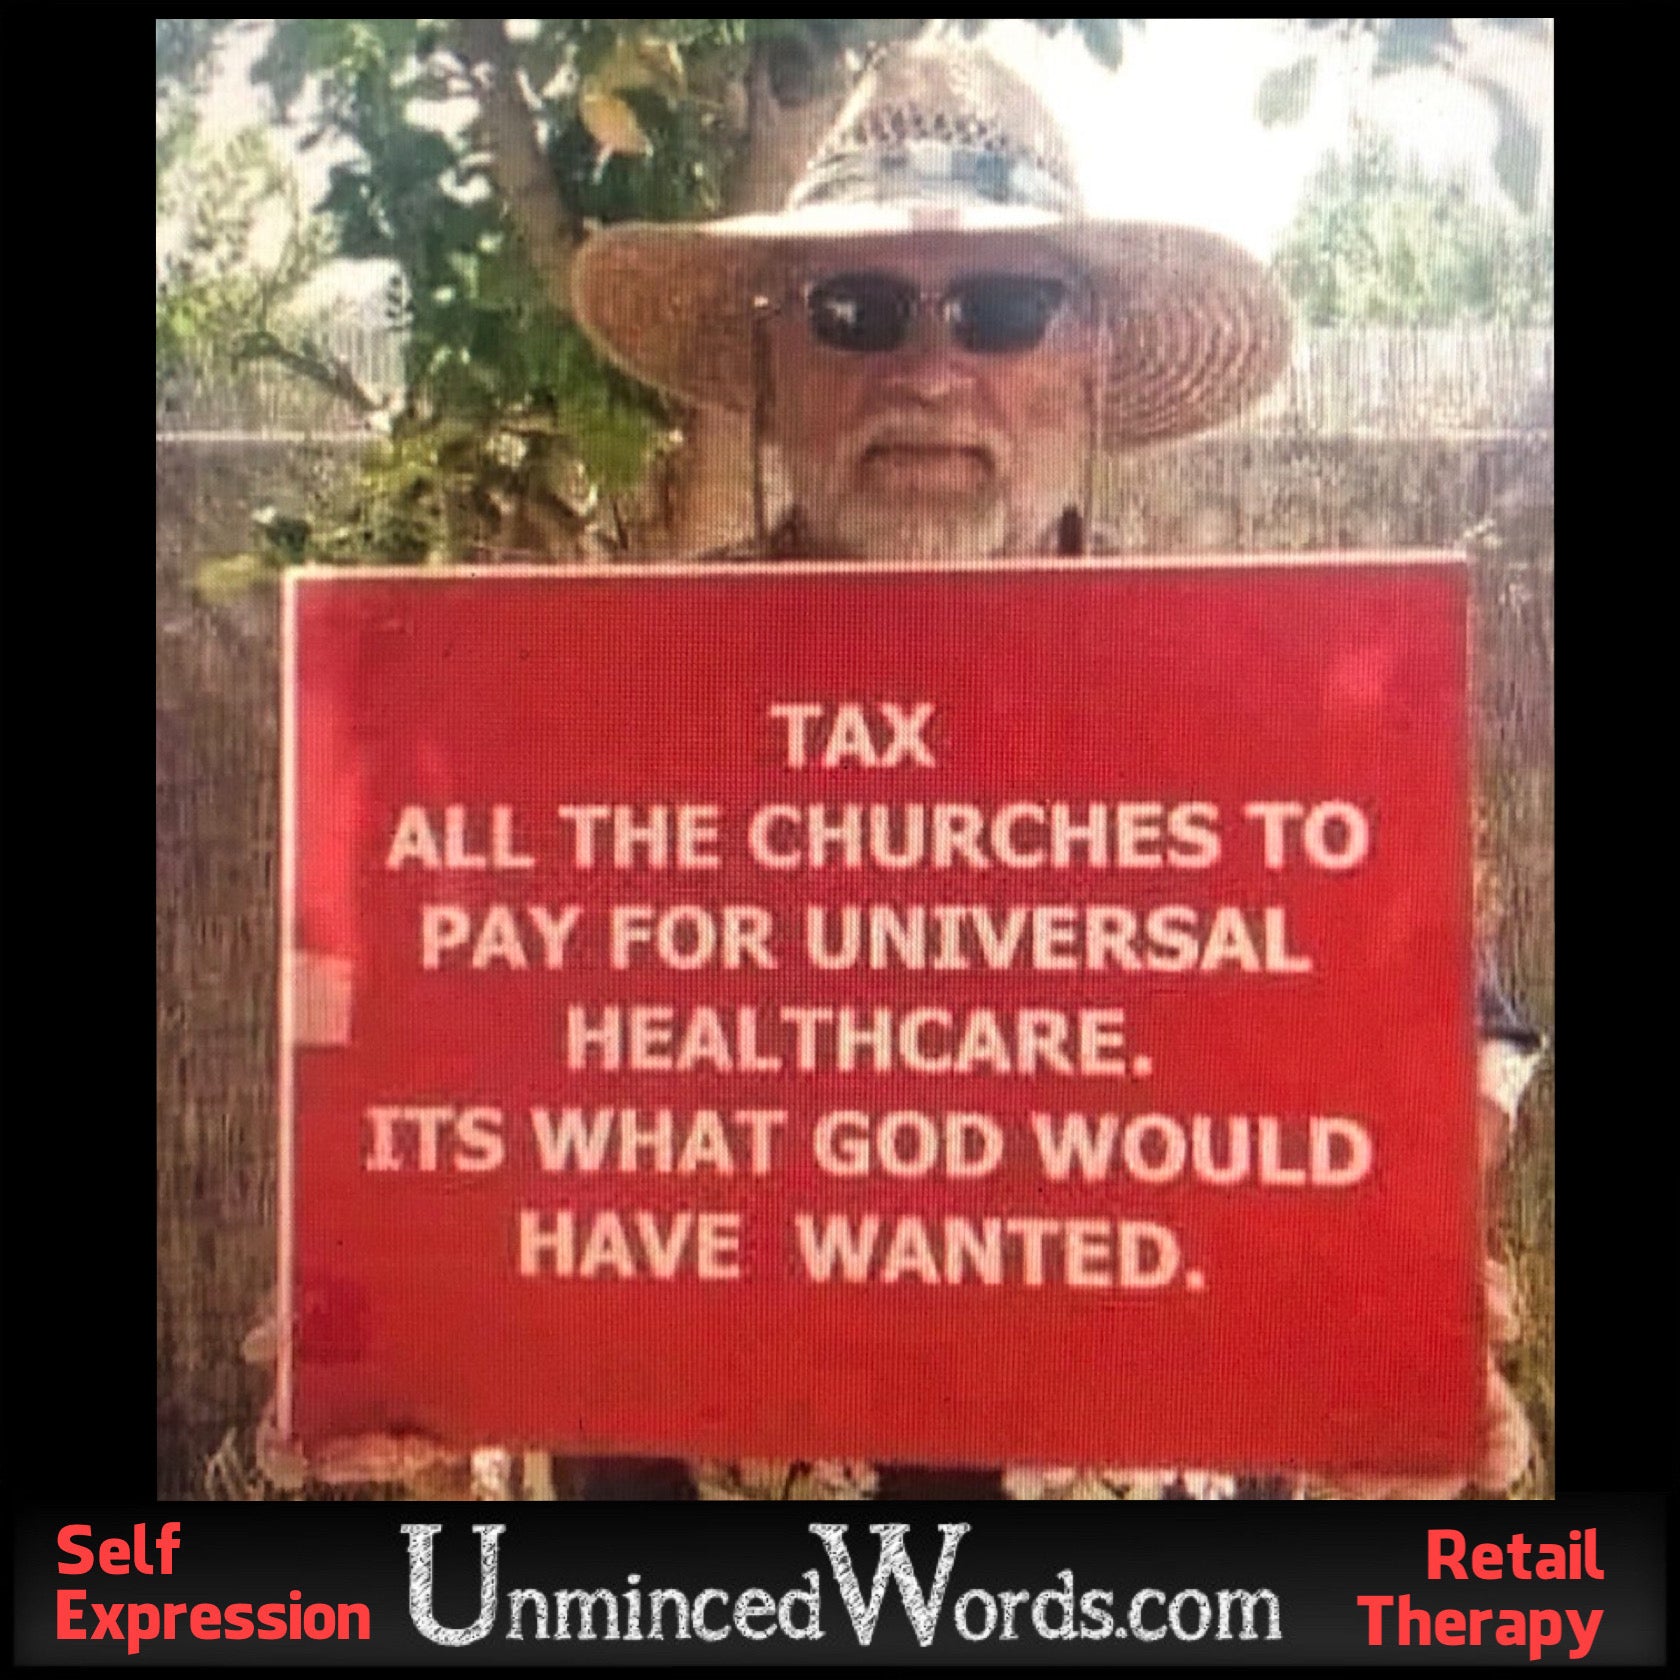 “Tax all the churches…” sign is interesting